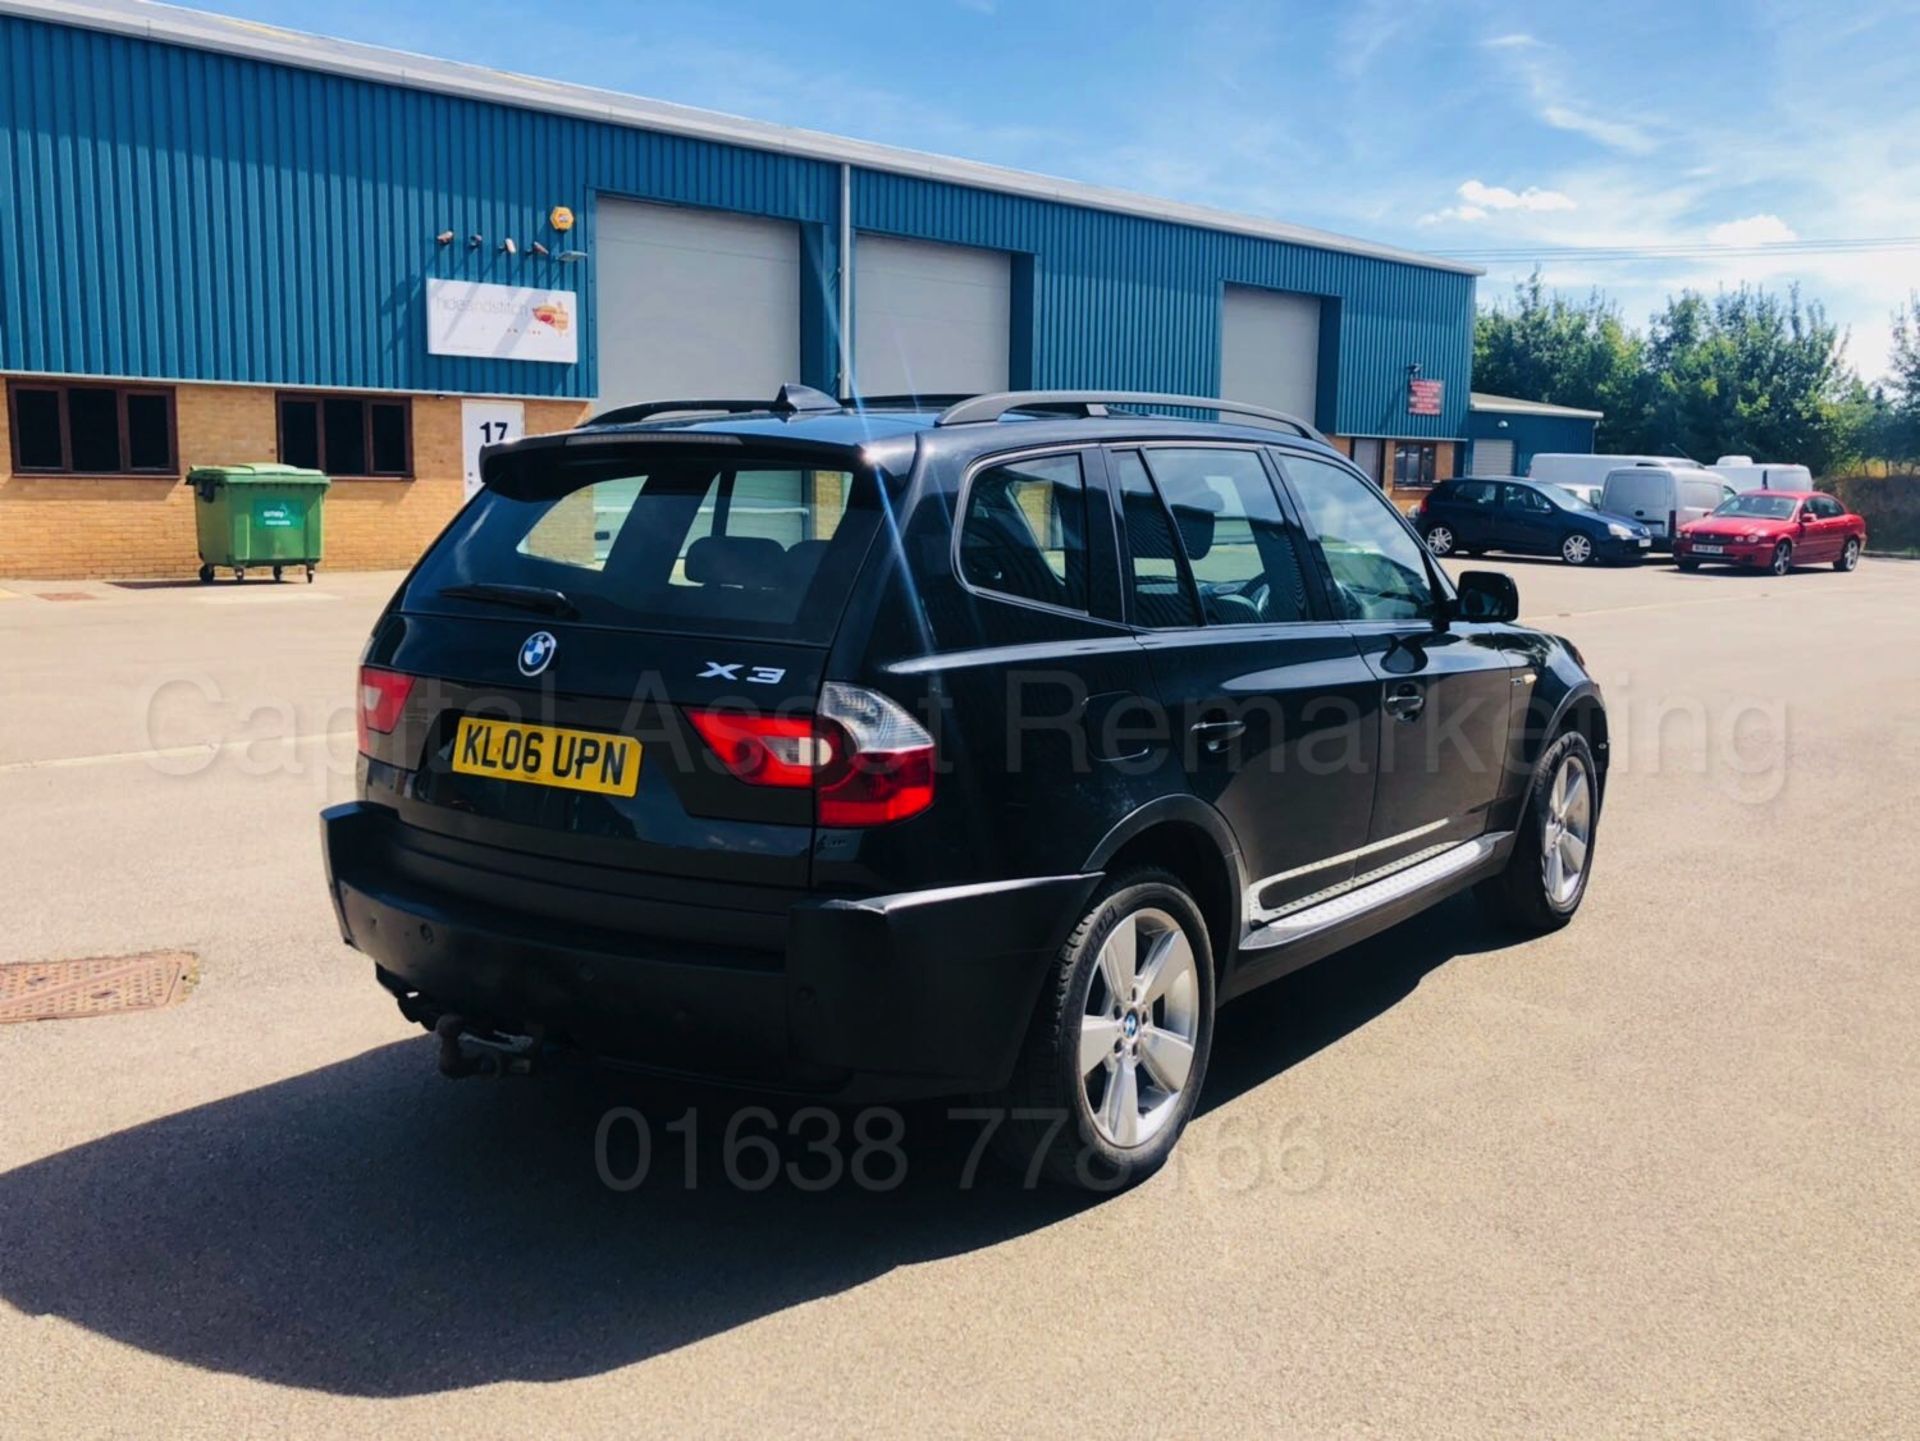 BMW X3 *SPORT EDITION* (2006) '3.0 DIESEL - 218 BHP - AUTOMATIC' *LEATHER / AIR CON* (NO VAT) - Image 14 of 29